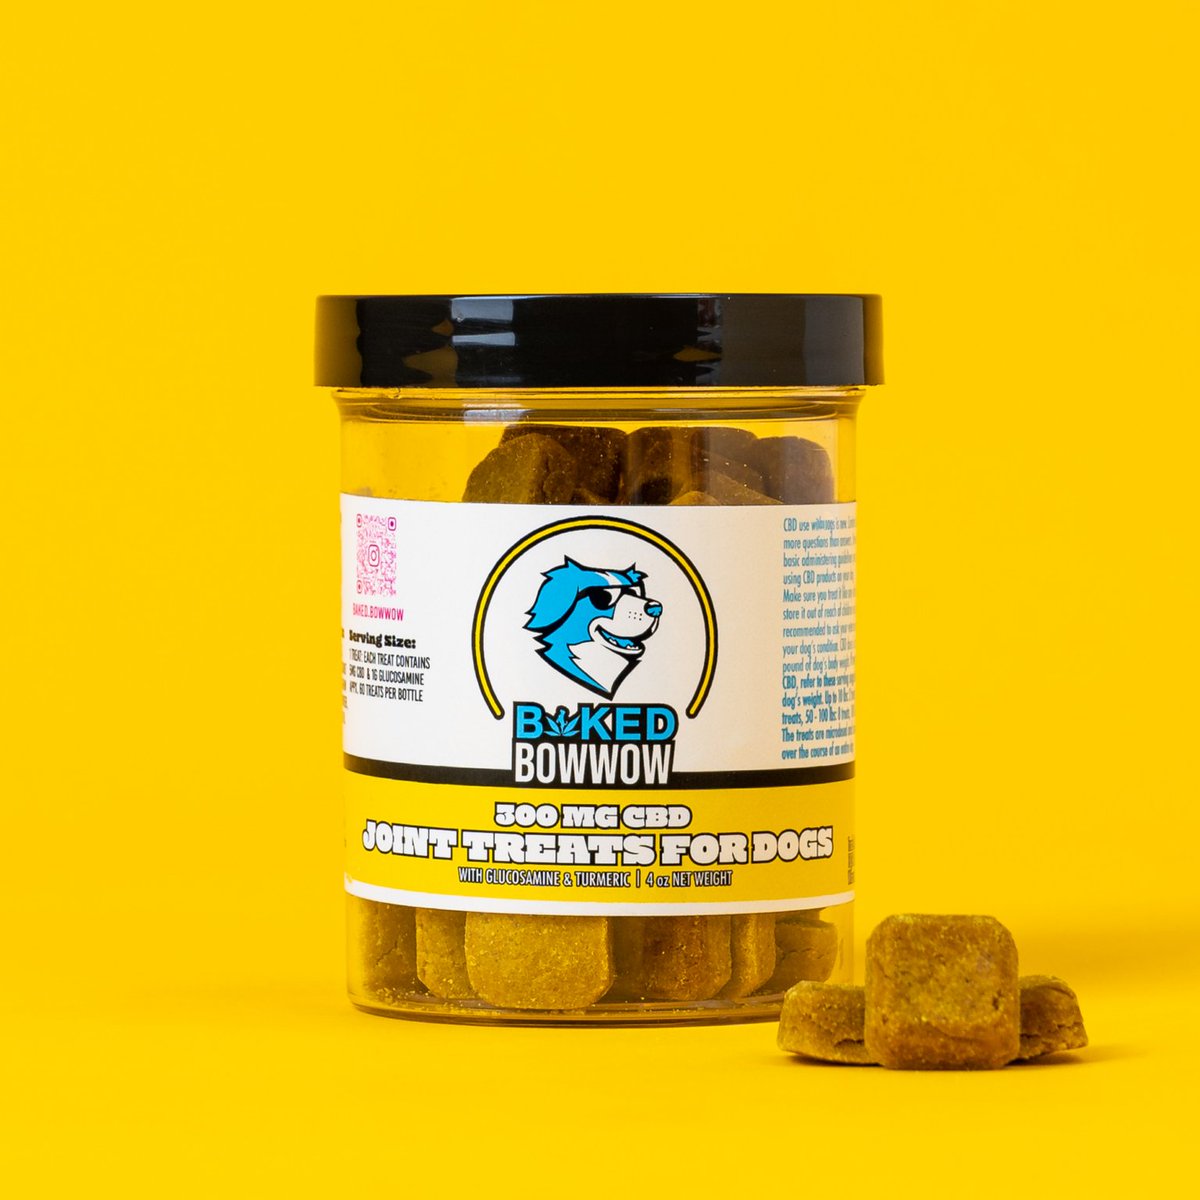 Deal of the Day! Eighty Six Baked BowWow 300mg #CBD Joint Treats for #Dogs: Today Only $25.49 with Coupon Code: KEEP15 -- rb.gy/9bfir

#cbdforpets #cbdfordogs #dogtreats